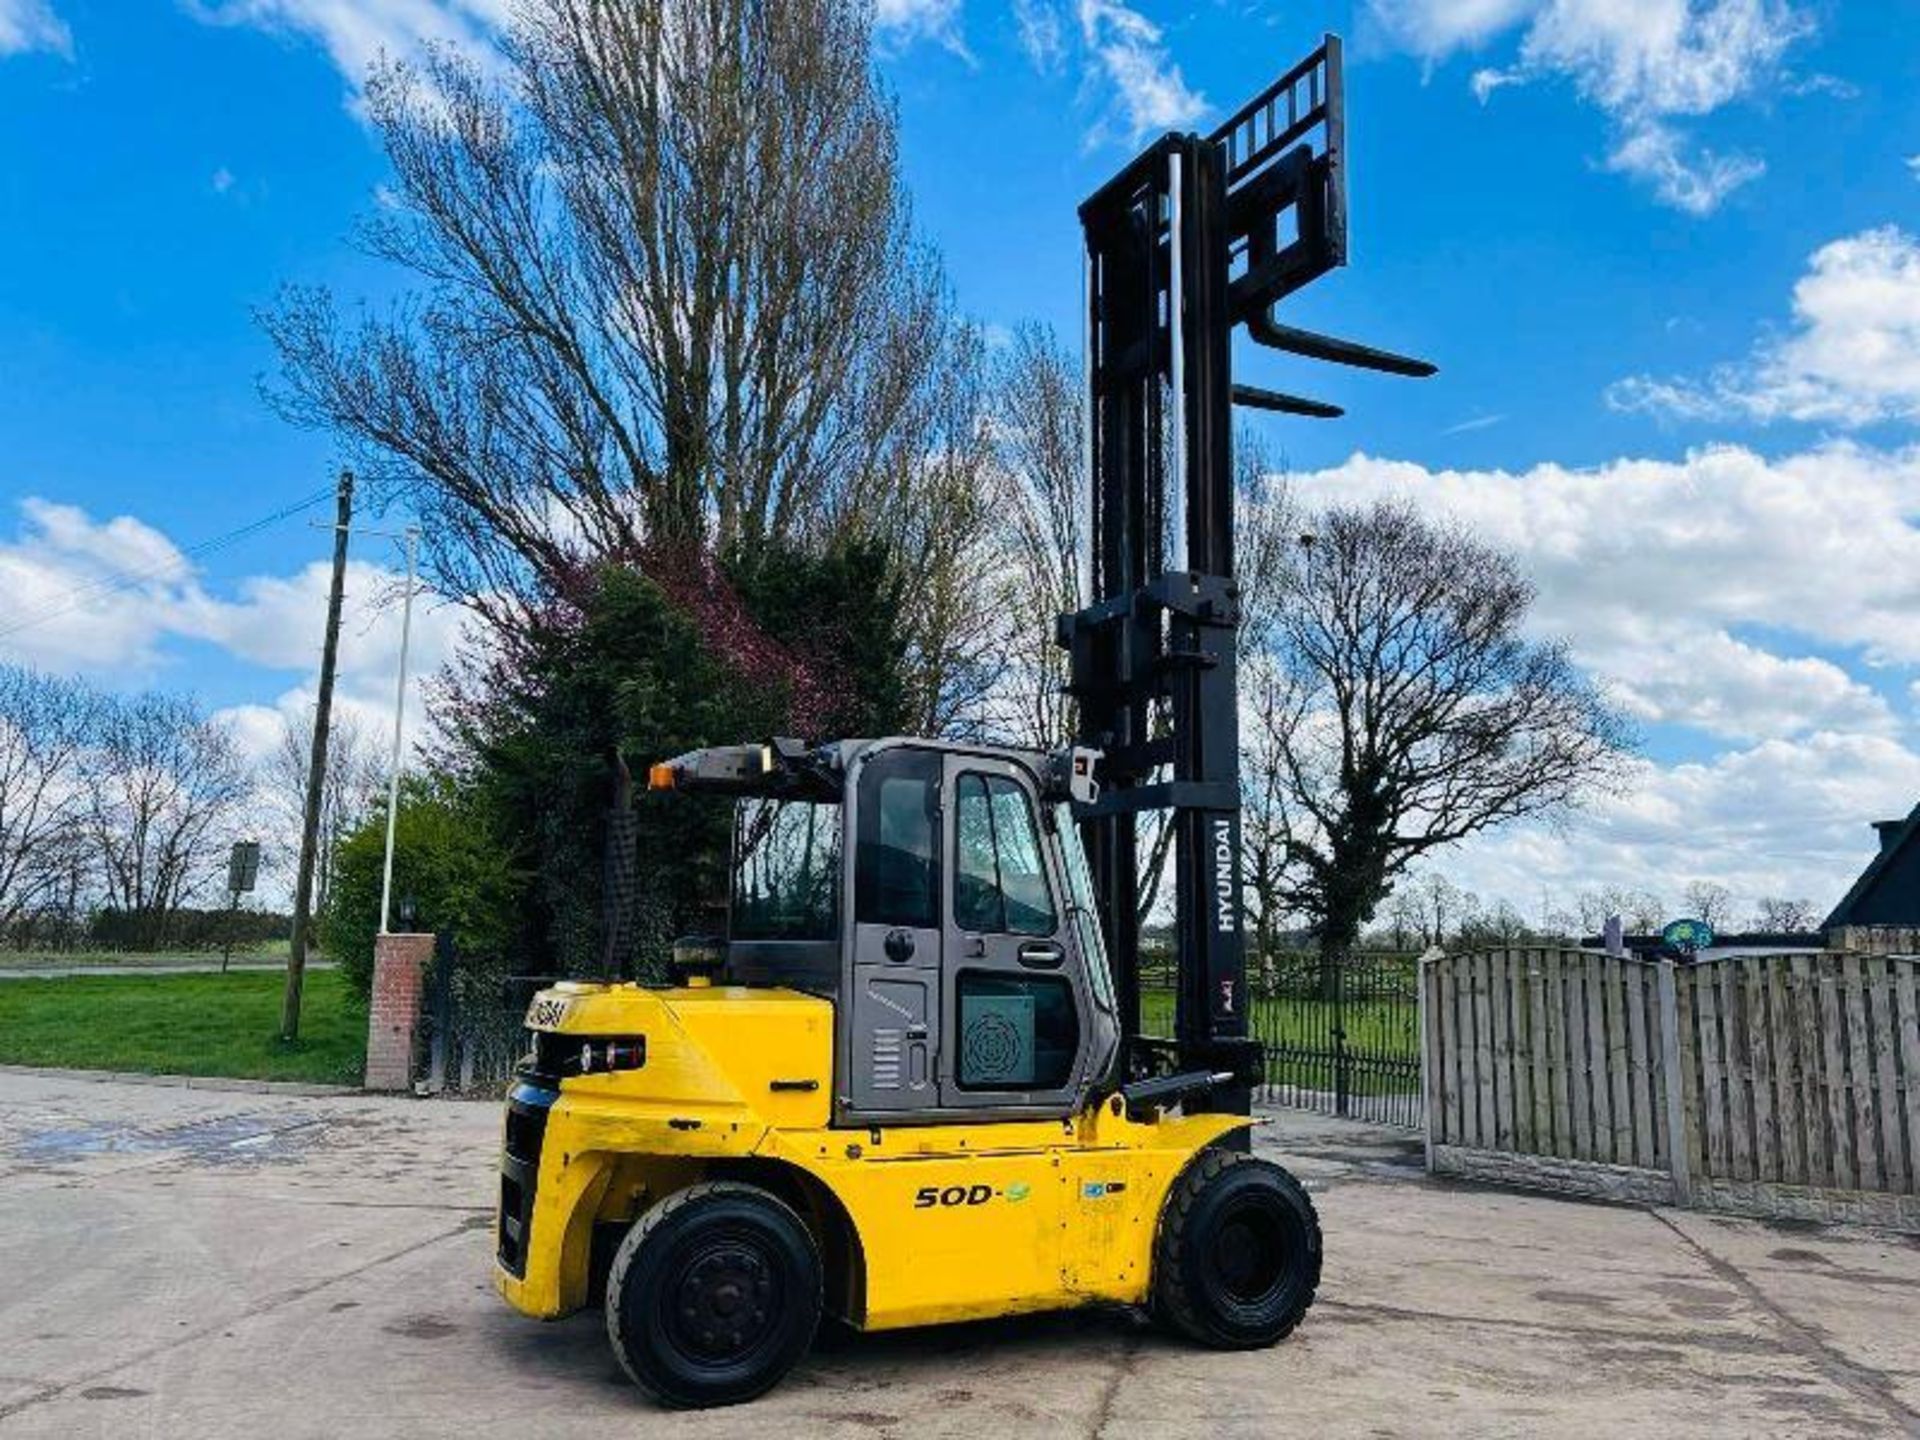 HYUNDAI 50D-9 DIESEL FORKLIFT *YEAR 2016, 5 TON LIFT* C/W SIDE SHIFT - Image 3 of 17